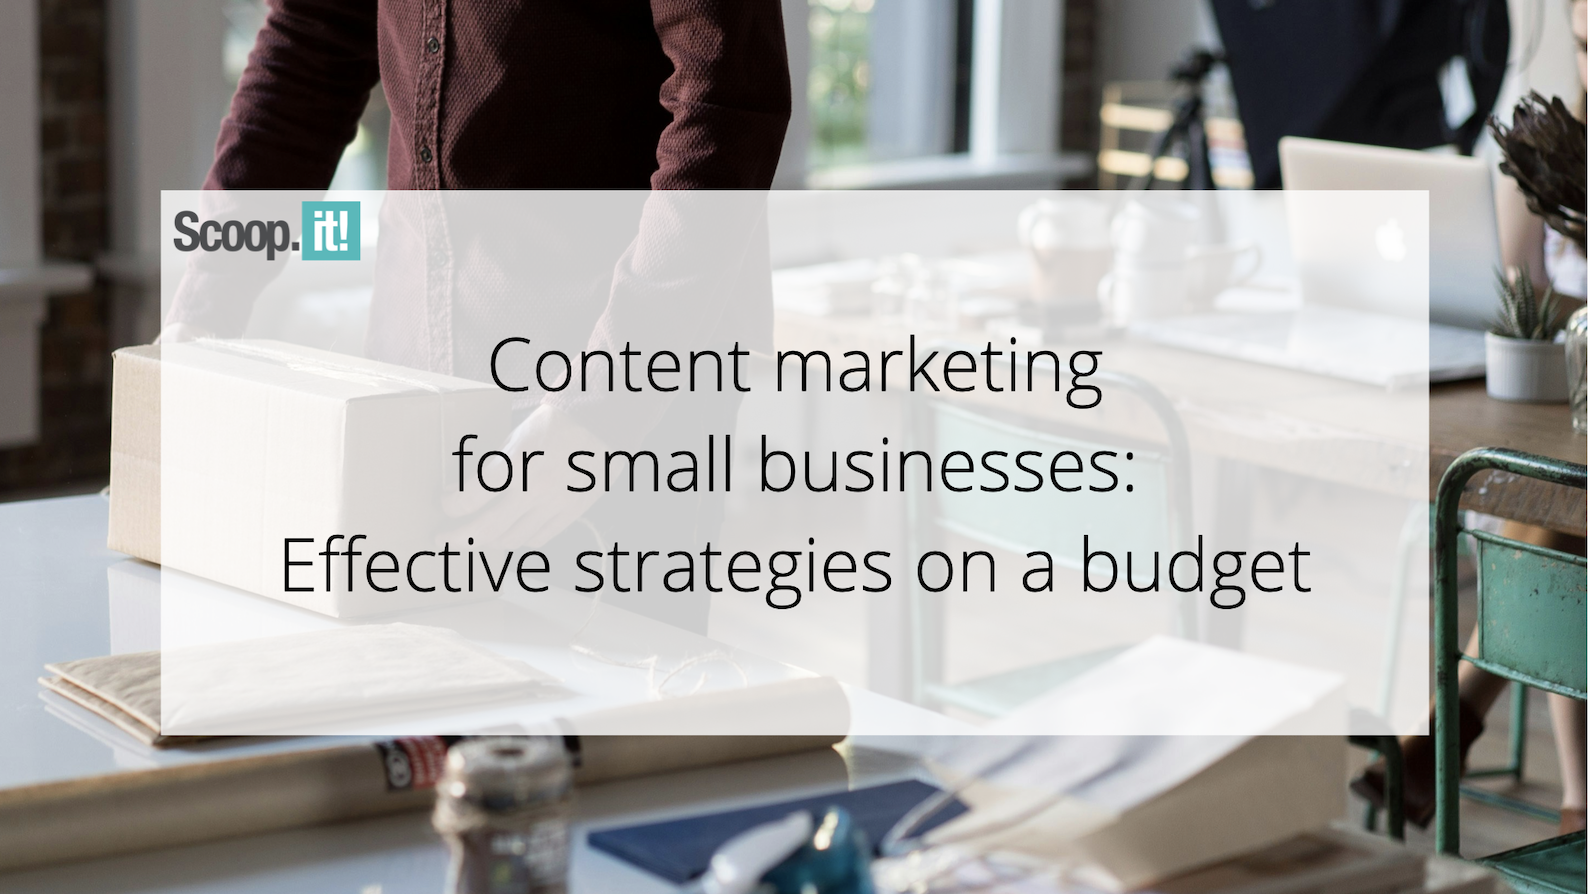 content-marketing-for-small-businesses:-effective-strategies-on-a-budget-–-scoop.it-blog